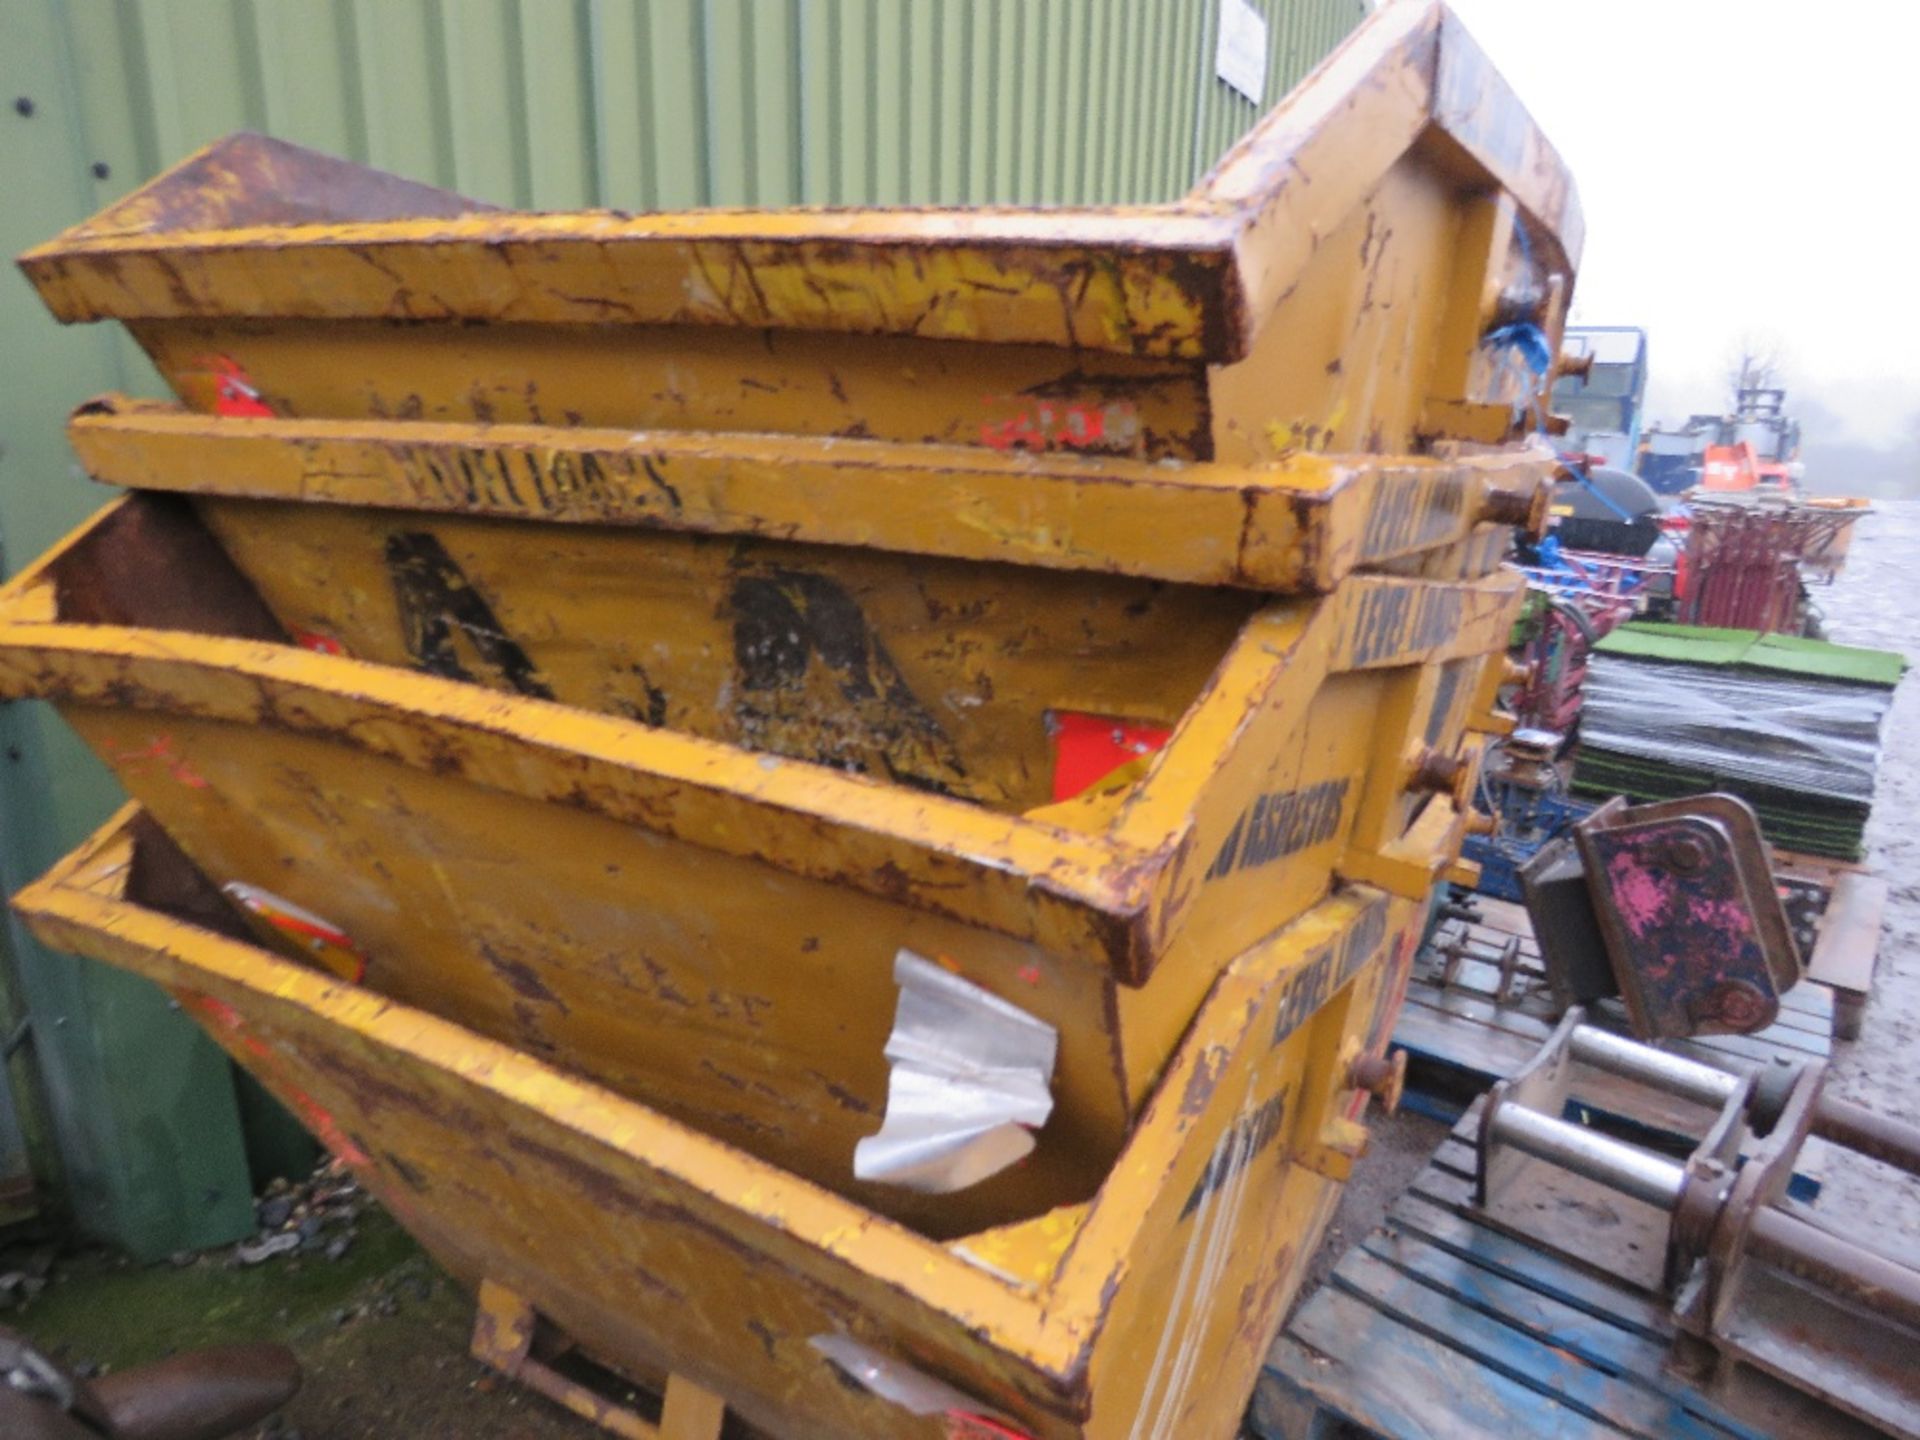 STACK OF 4 X CHAIN LIFT SKIPS, FLOORS LOOKED SOUND FROM INITIAL INSPECTION. - Image 3 of 4